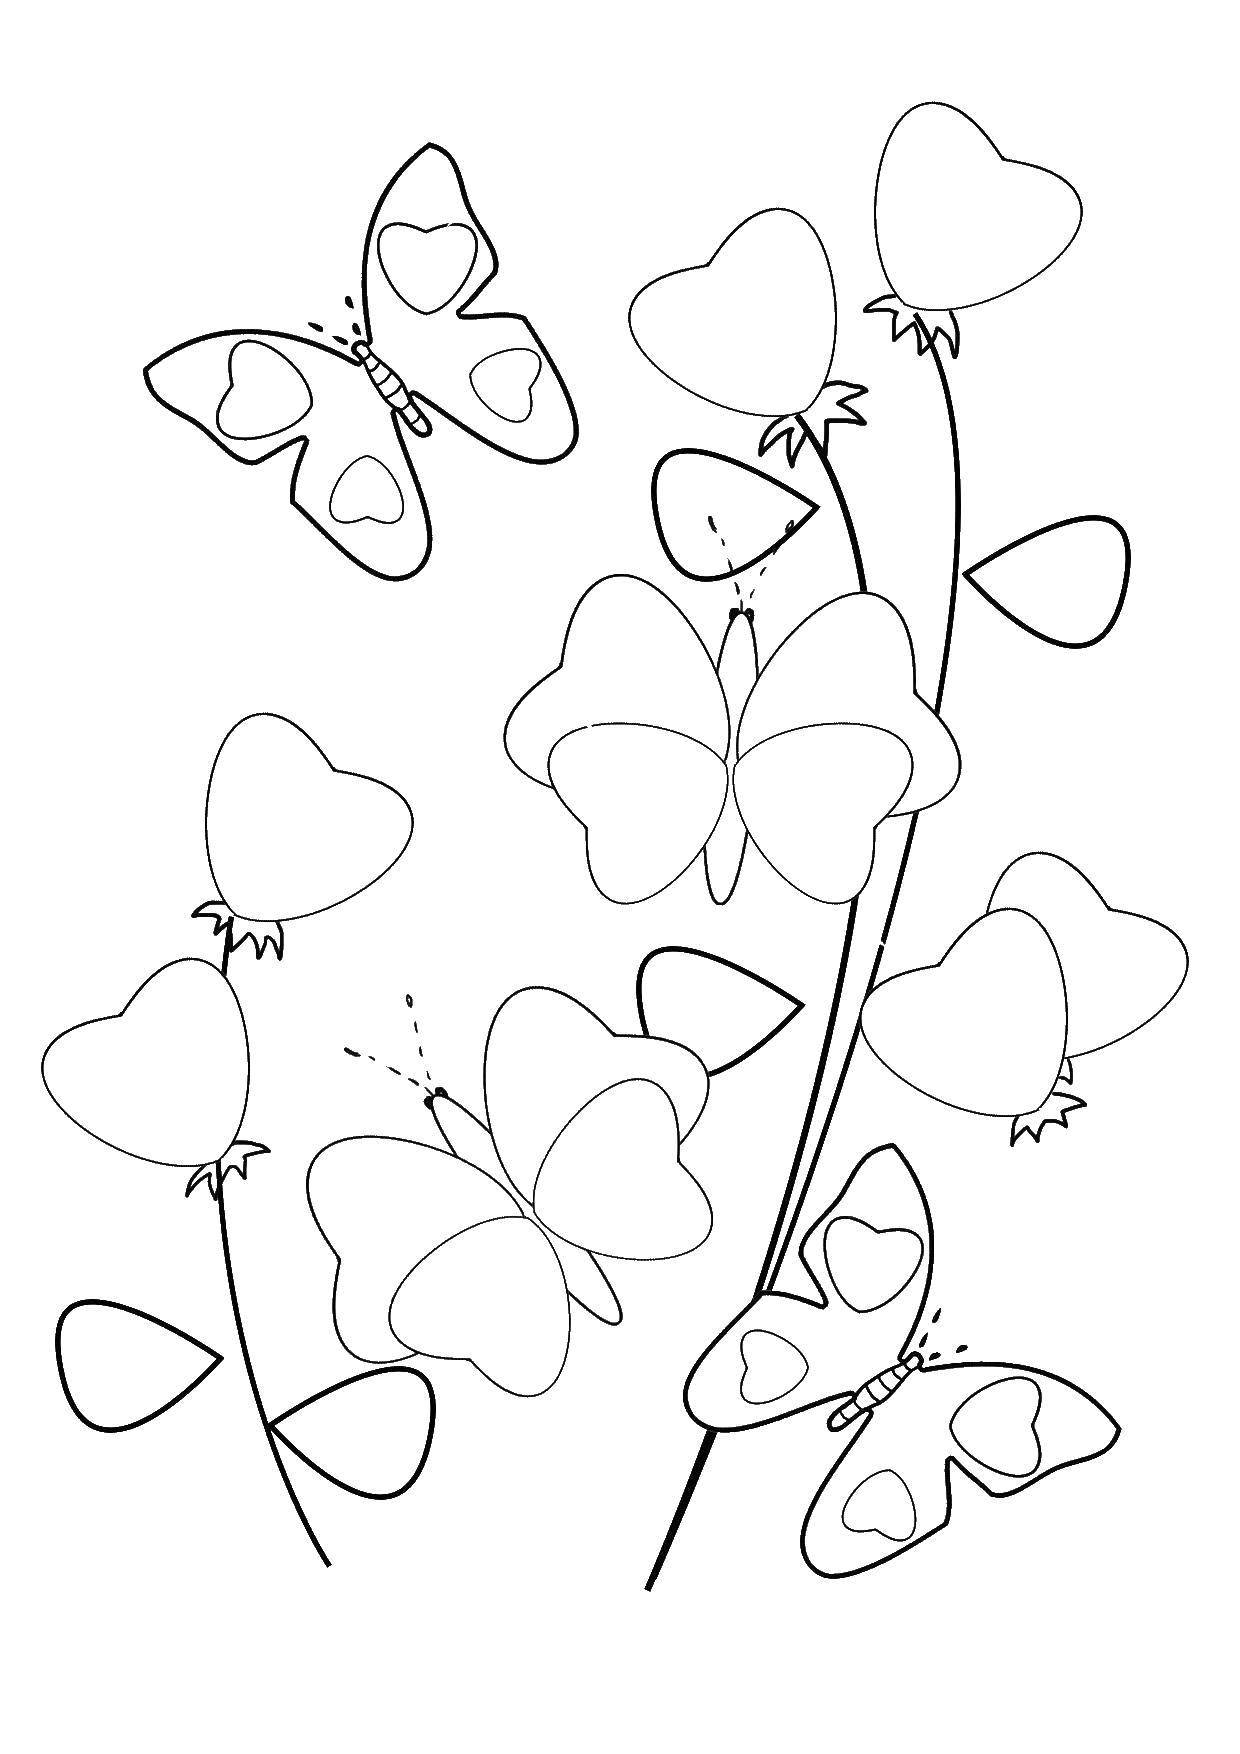 Coloring Butterflies and hearts. Category butterflies. Tags:  Butterfly, heart.